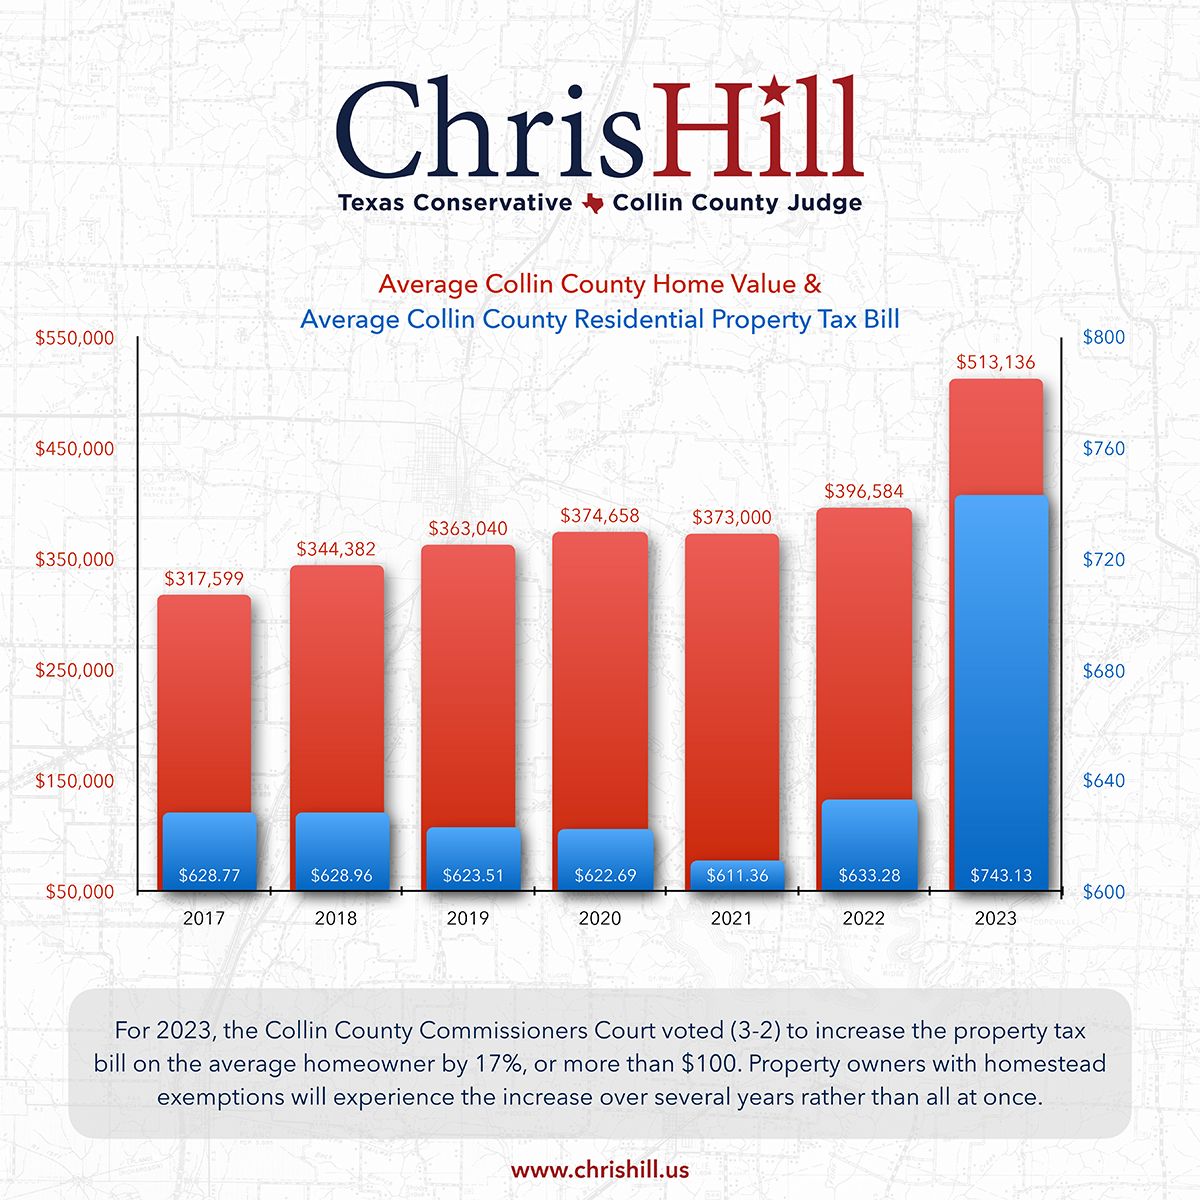 Average Collin County Home Value & Average Collin County Residential Property Tax Bill